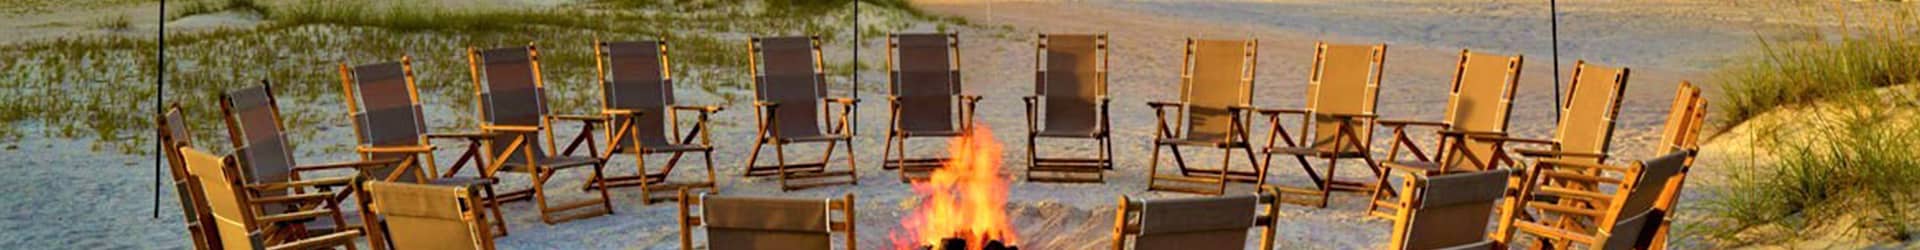 Deck chairs around a fire